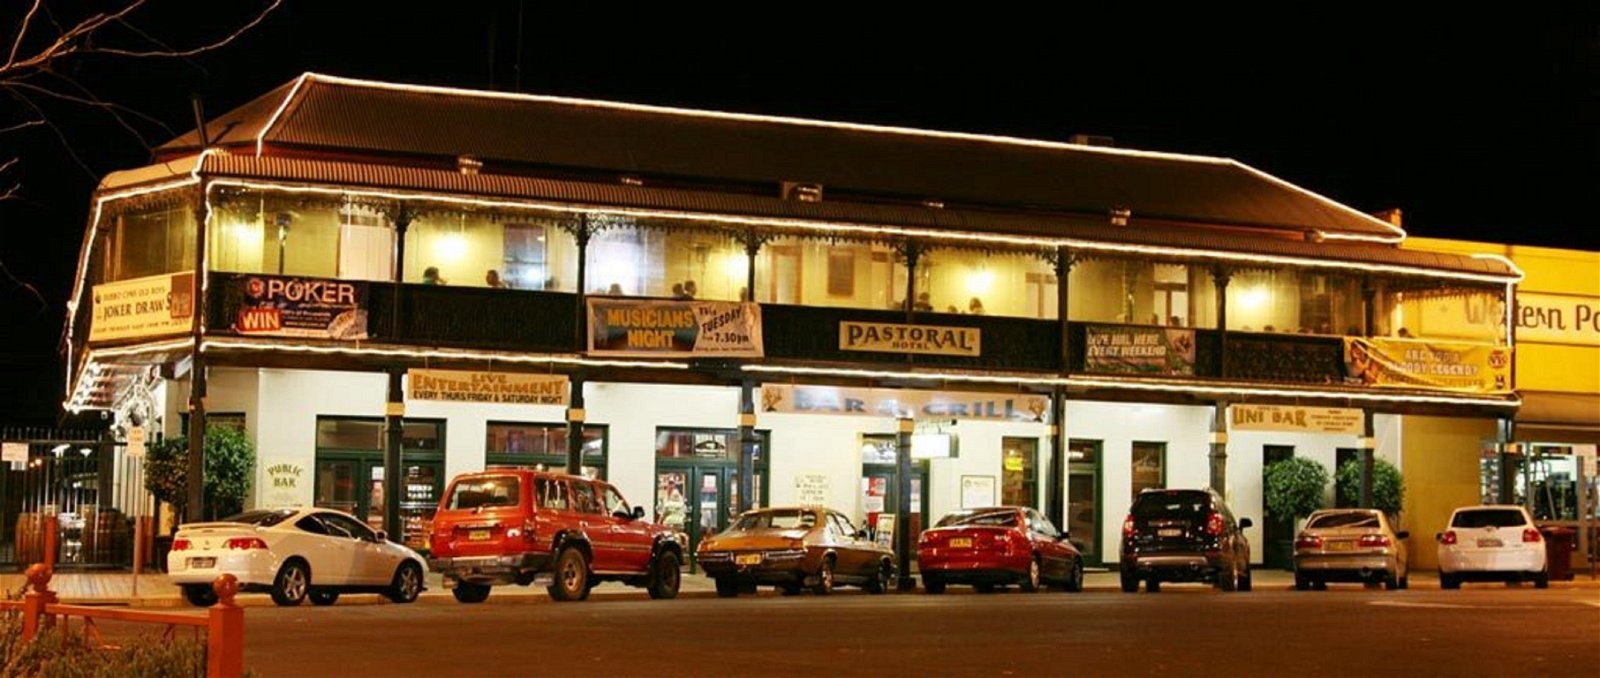 The Pastoral Hotel - Temporarily Closed - Pubs Sydney